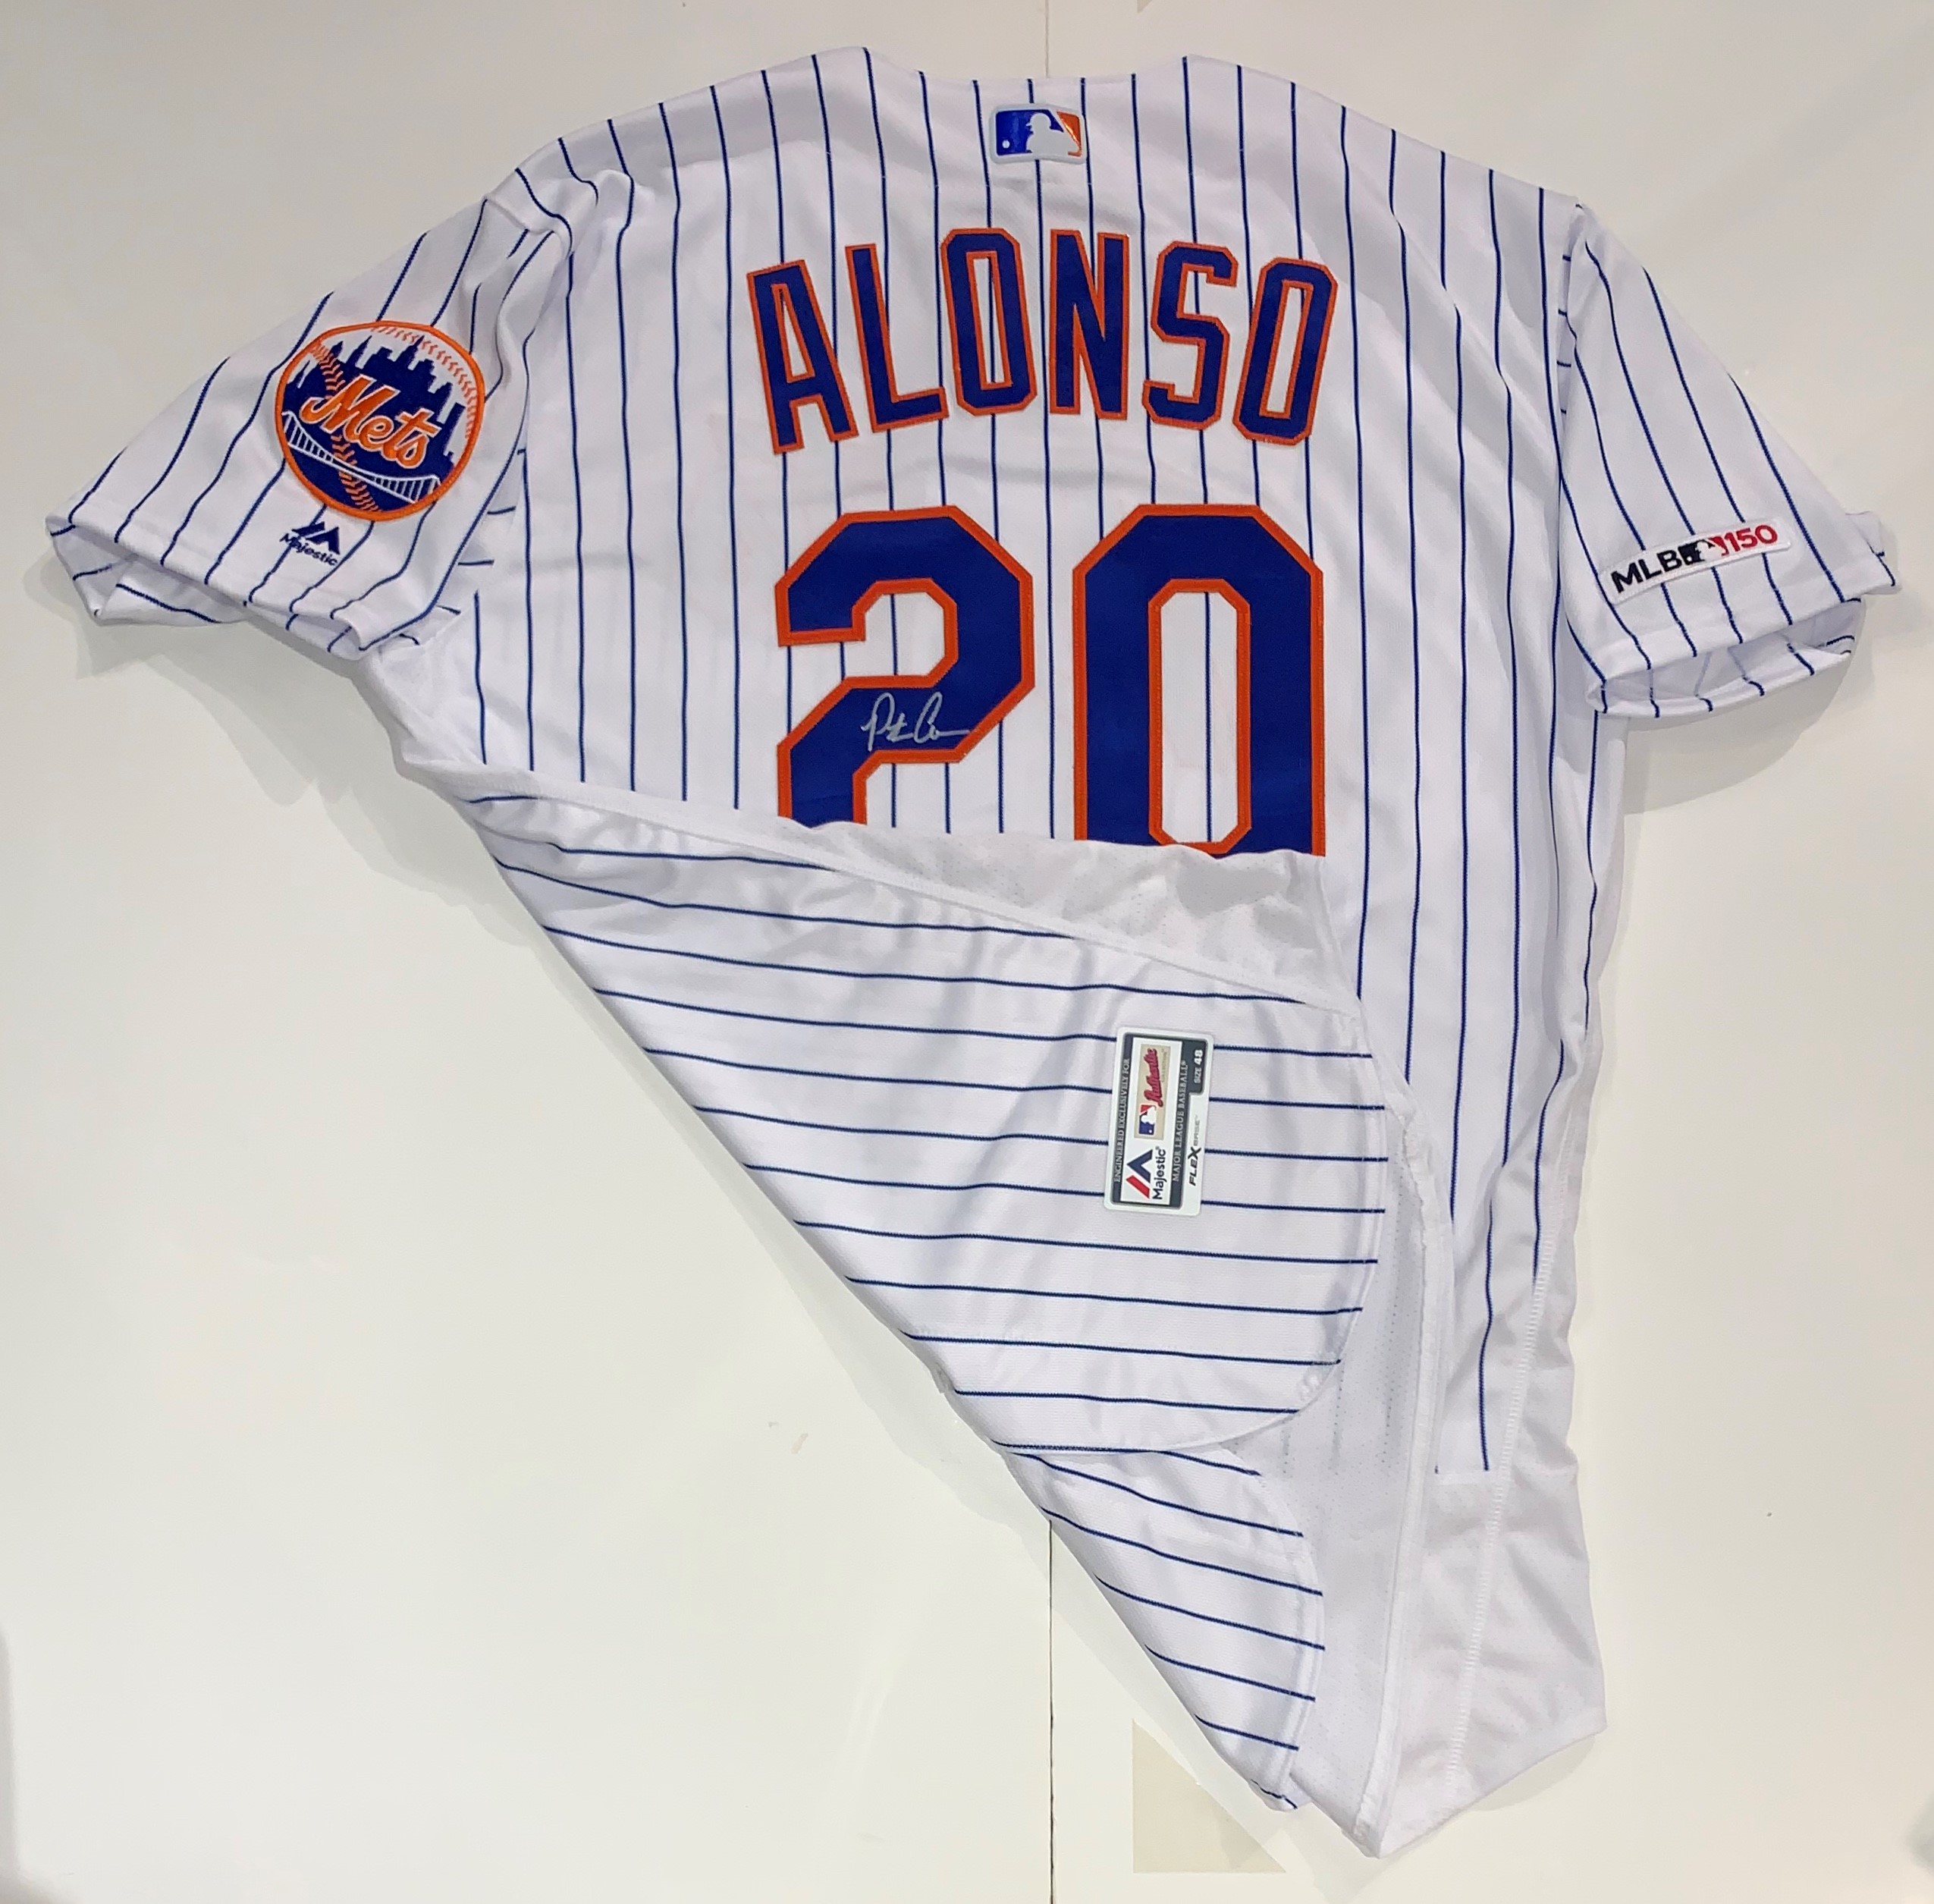 Pete Alonso #20 - Autographed Game Used First Responder Hat and Game Used  White Commemorative Jersey with American Flag Patch - Mets vs. Yankees -  9/11/2021